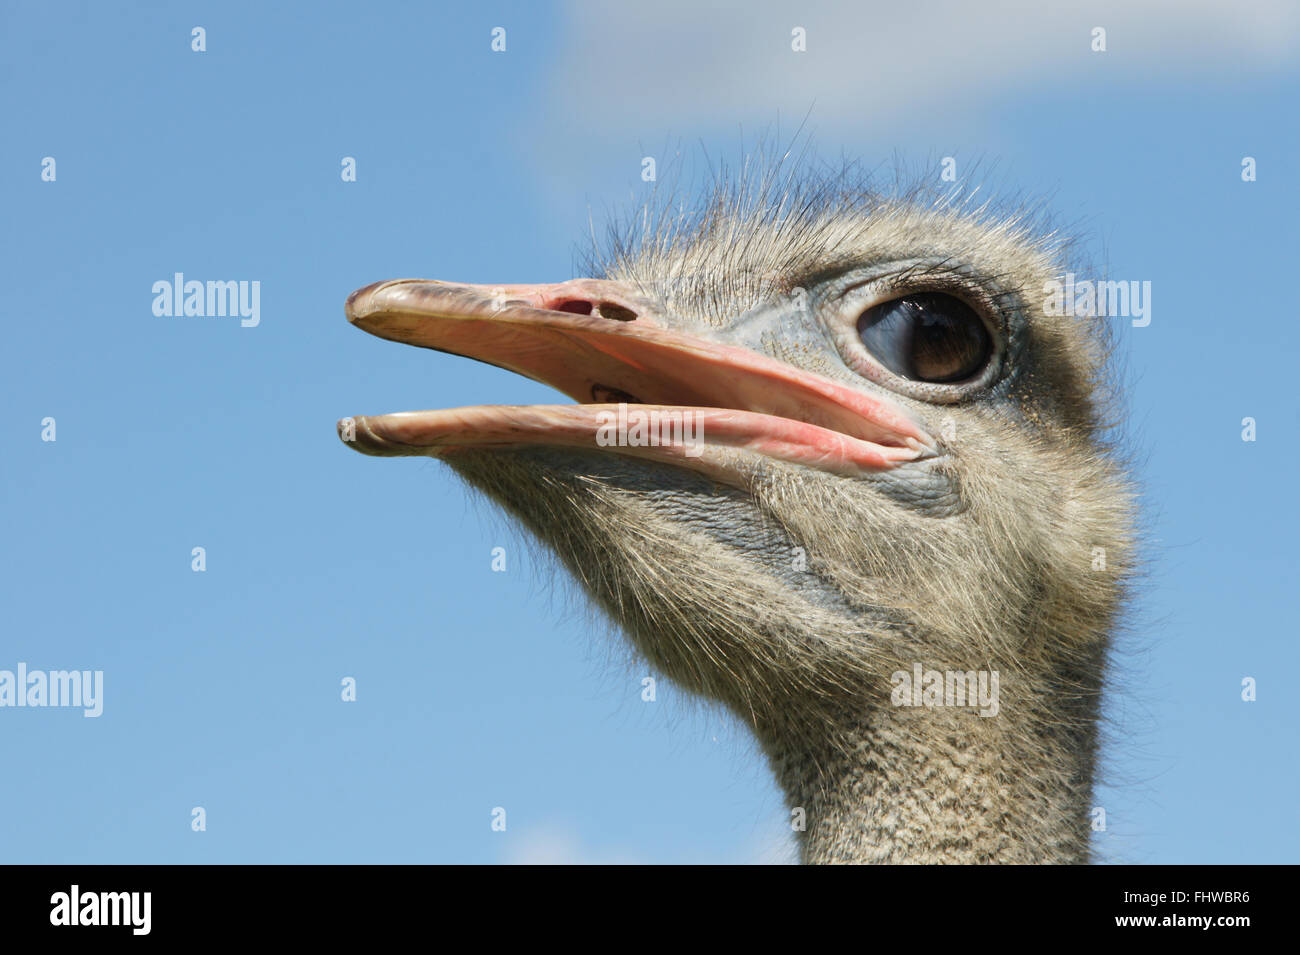 Struthio camelis, African ostrich Stock Photo